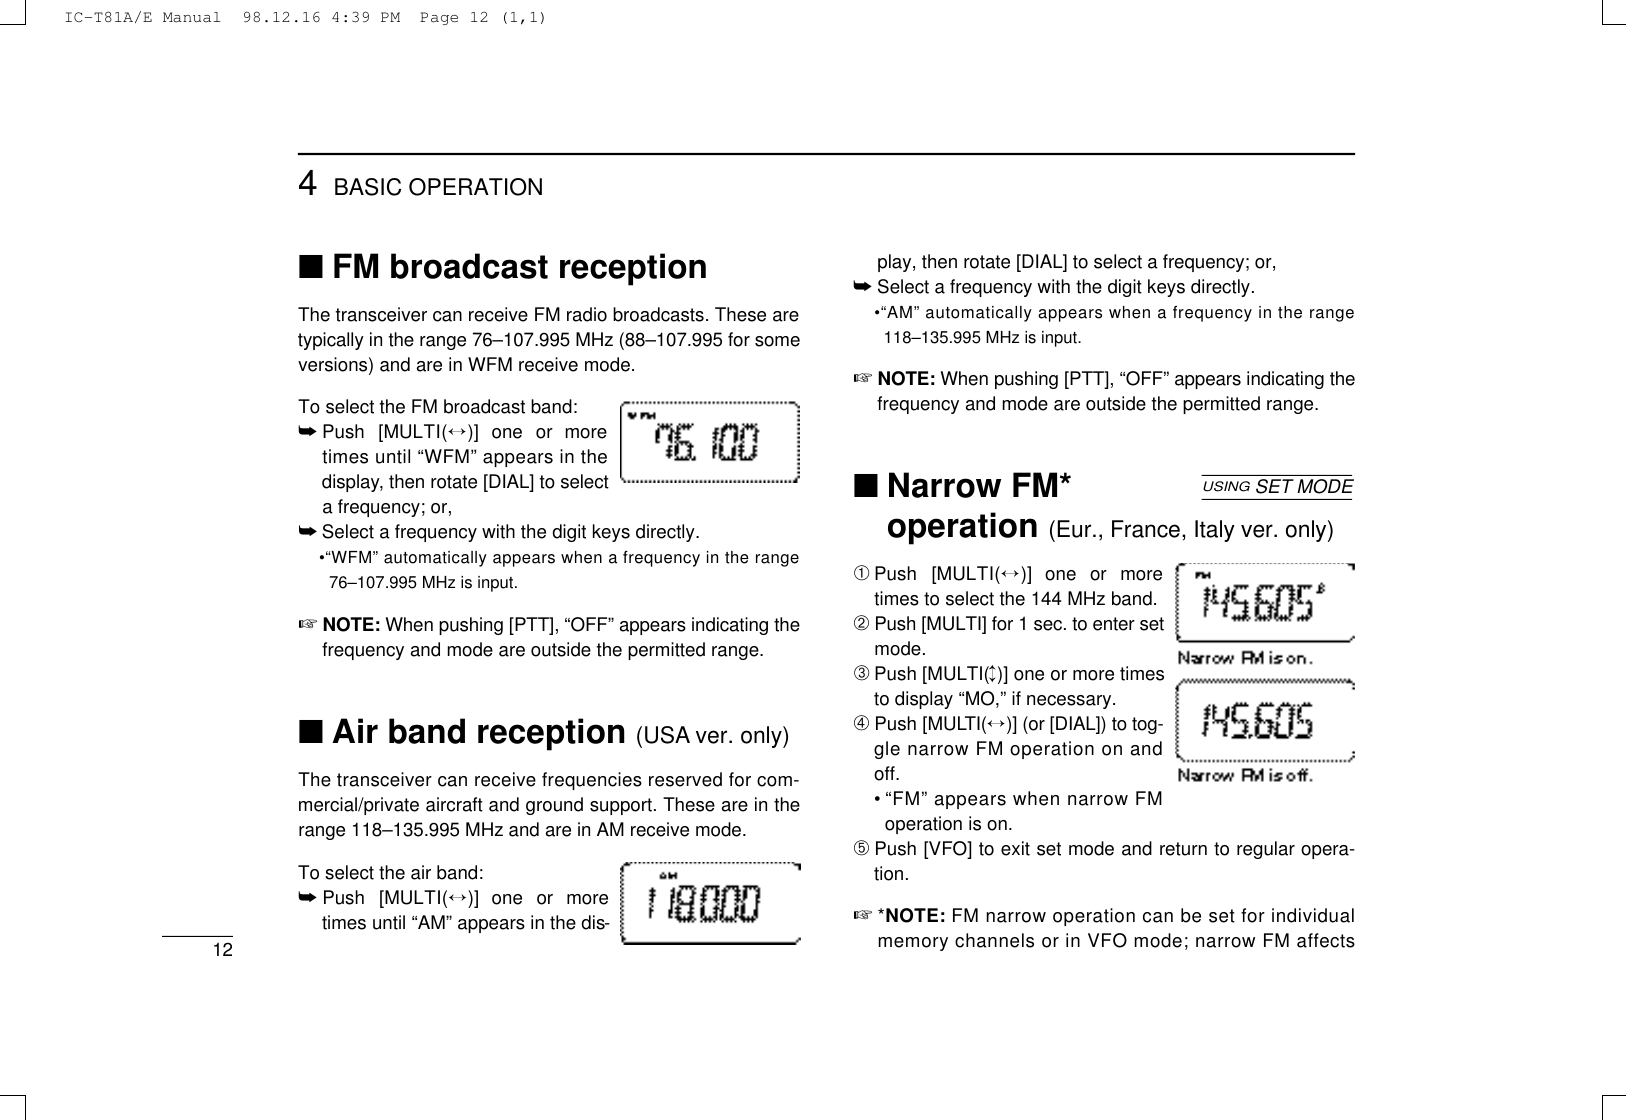 124BASIC OPERATION■FM broadcast receptionThe transceiver can receive FM radio broadcasts. These aretypically in the range 76–107.995 MHz (88–107.995 for someversions) and are in WFM receive mode.To select the FM broadcast band:➥Push  [MULT I (↔)]  one  or  moretimes until “WFM” appears in thed i s p l a y, then rotate [DIAL] to selecta frequency; or,➥Select a frequency with the digit keys directly.•“WFM” automatically appears when a frequency in the range76–107.995 MHz is input.☞N O T E : When pushing [PTT], “OFF” appears indicating thefrequency and mode are outside the permitted range.■Air band reception (USA ver. only)The transceiver can receive frequencies reserved for com-mercial/private aircraft and ground support. These are in therange 118–135.995 MHz and are in AM receive mode.To select the air band:➥Push  [MULT I (↔)]  one  or  moretimes until “AM” appears in the dis-play, then rotate [DIAL] to select a frequency; or,➥Select a frequency with the digit keys directly.•“AM” automatically appears when a frequency in the range118–135.995 MHz is input.☞N O T E : When pushing [PTT], “OFF” appears indicating thefrequency and mode are outside the permitted range.■Narrow FM*operation (Eur., France, Italy ver. only)➀Push  [MULT I (↔)]  one  or  moretimes to select the 144 MHz band.➁Push [MULTI] for 1 sec. to enter setmode.➂Push [MULTI(↕)] one or more timesto display “MO,” if necessary.➃Push [MULT I ( ↔)] (or [DIAL]) to tog-gle narrow FM operation on andoff.•“FM” appears when narrow FMoperation is on.➄Push [VFO] to exit set mode and return to regular opera-tion.☞*N O T E : FM narrow operation can be set for individualmemory channels or in VFO mode; narrow FM aff e c t sUSINGSET MODEIC-T81A/E Manual  98.12.16 4:39 PM  Page 12 (1,1)